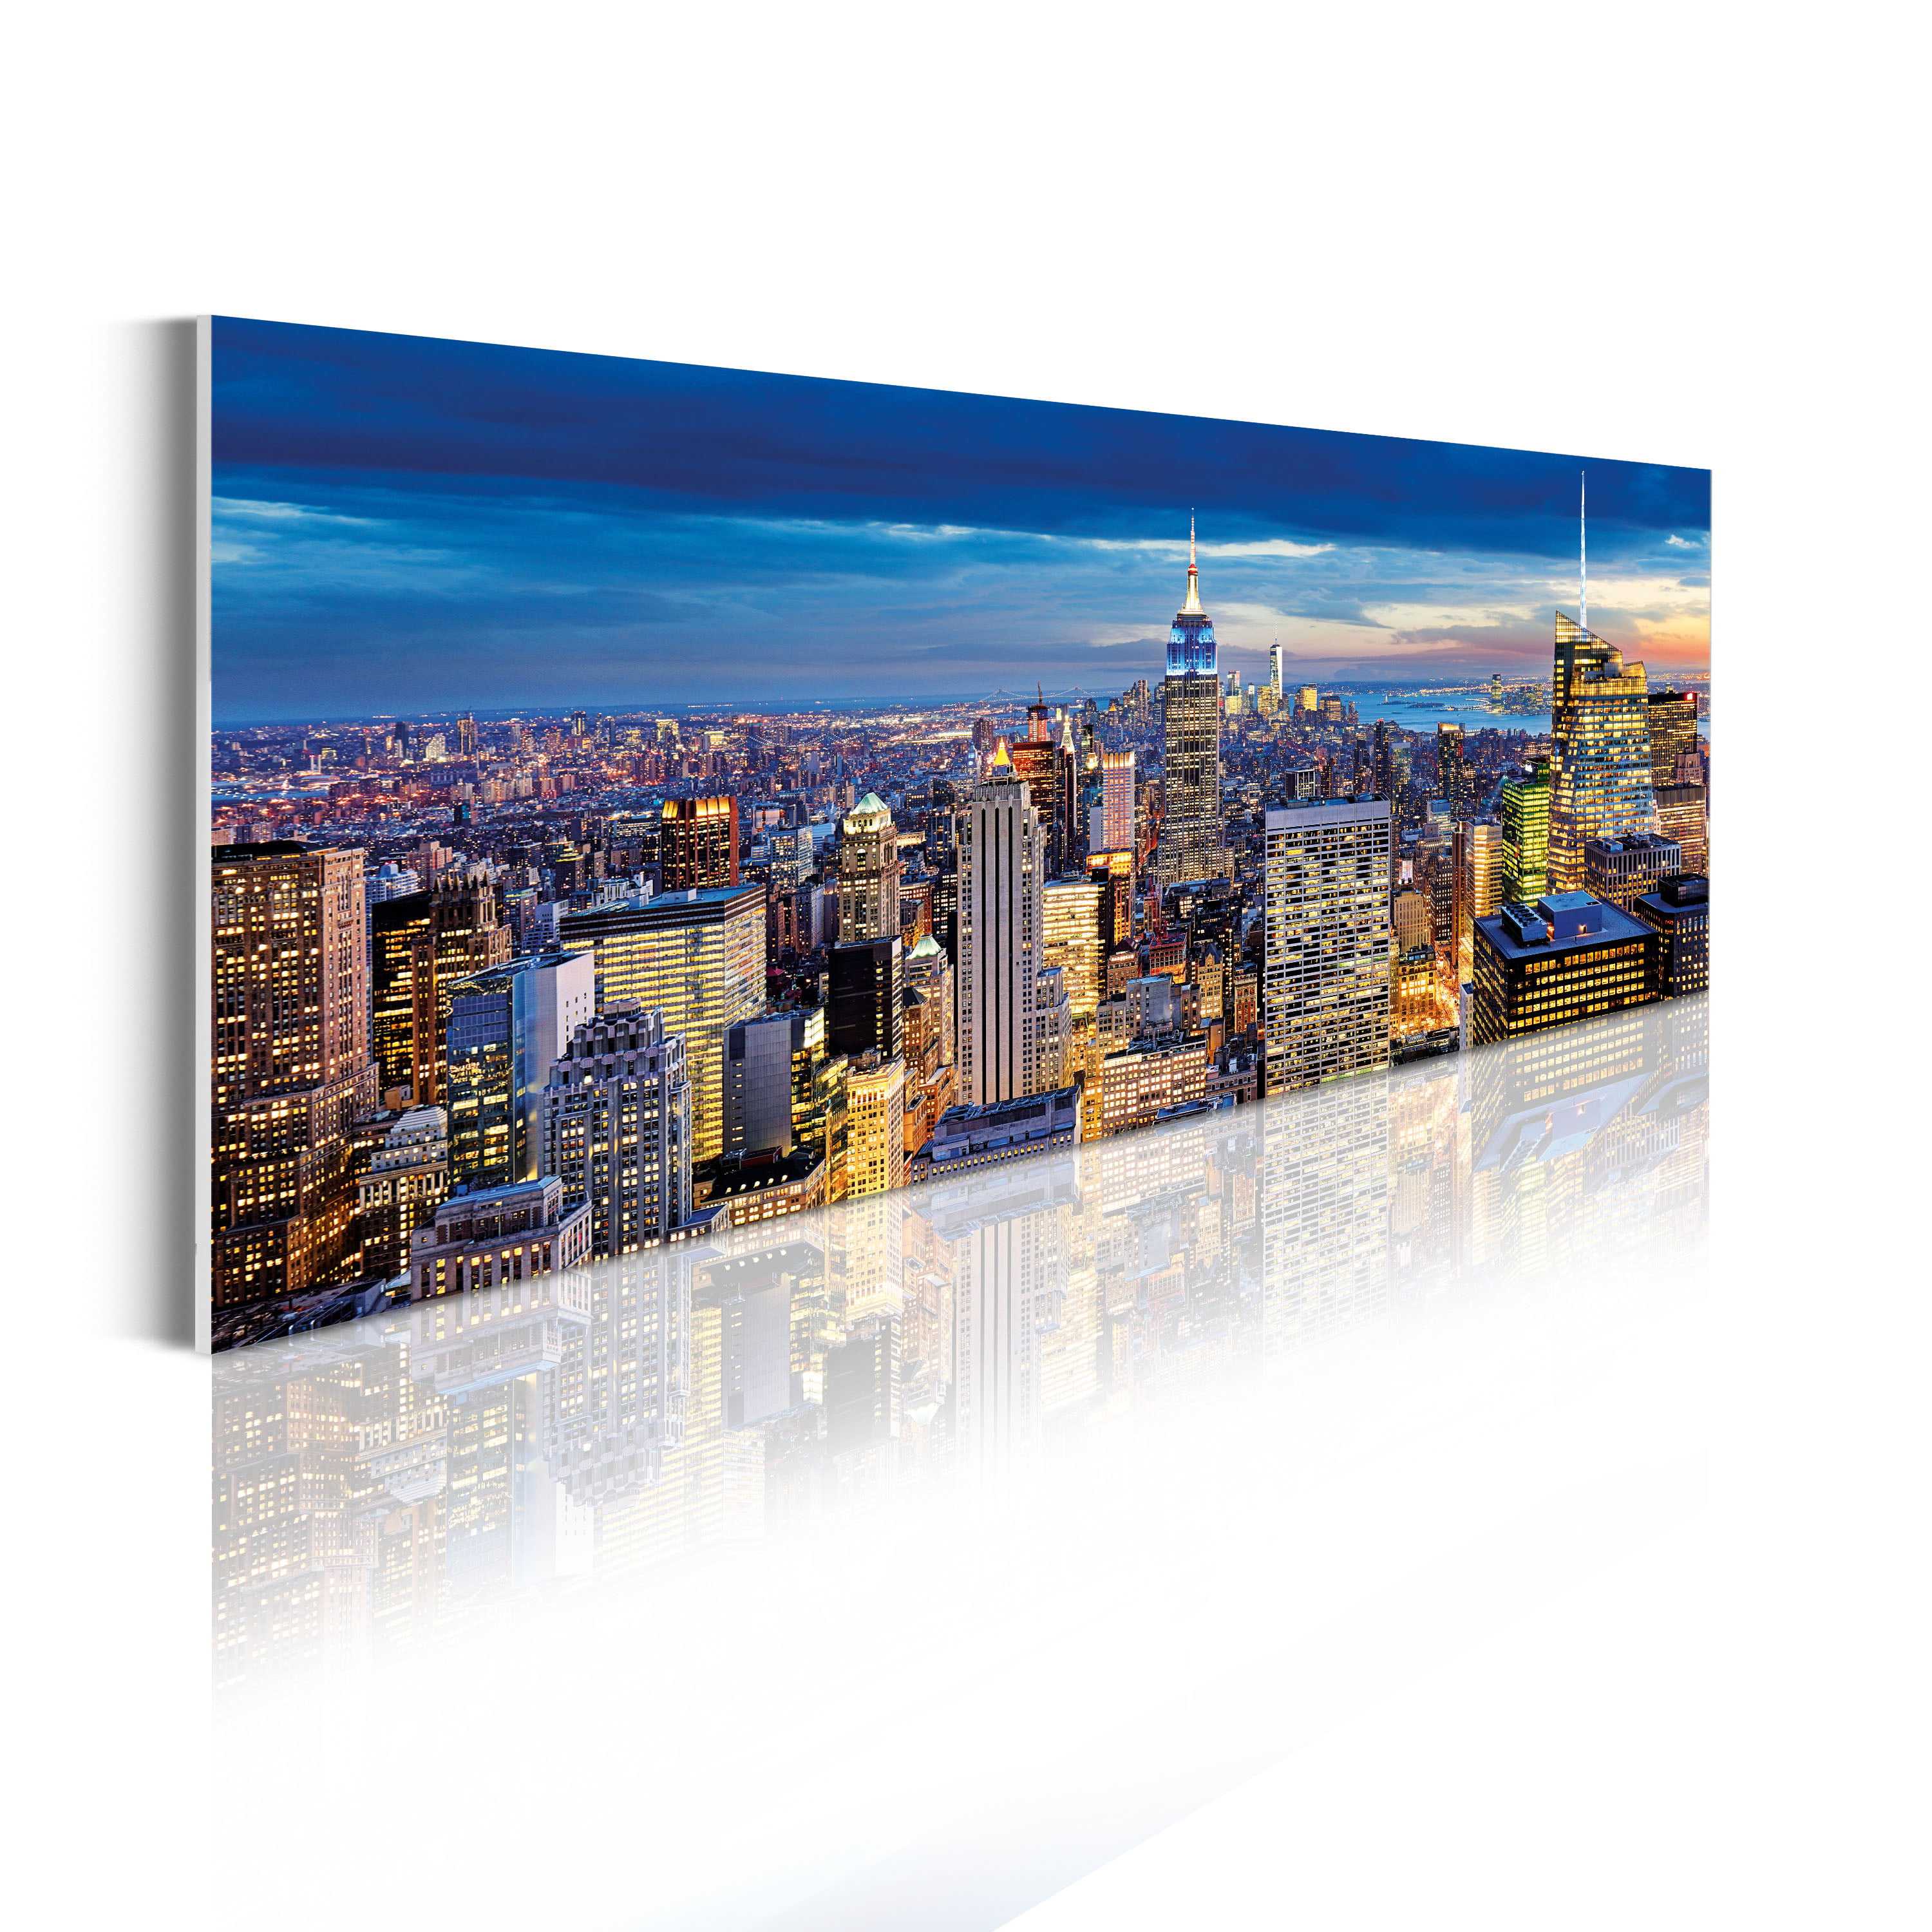 Cologne Germany Bridge Night Skyline 3.2 Wall Art Canvas Picture Print 